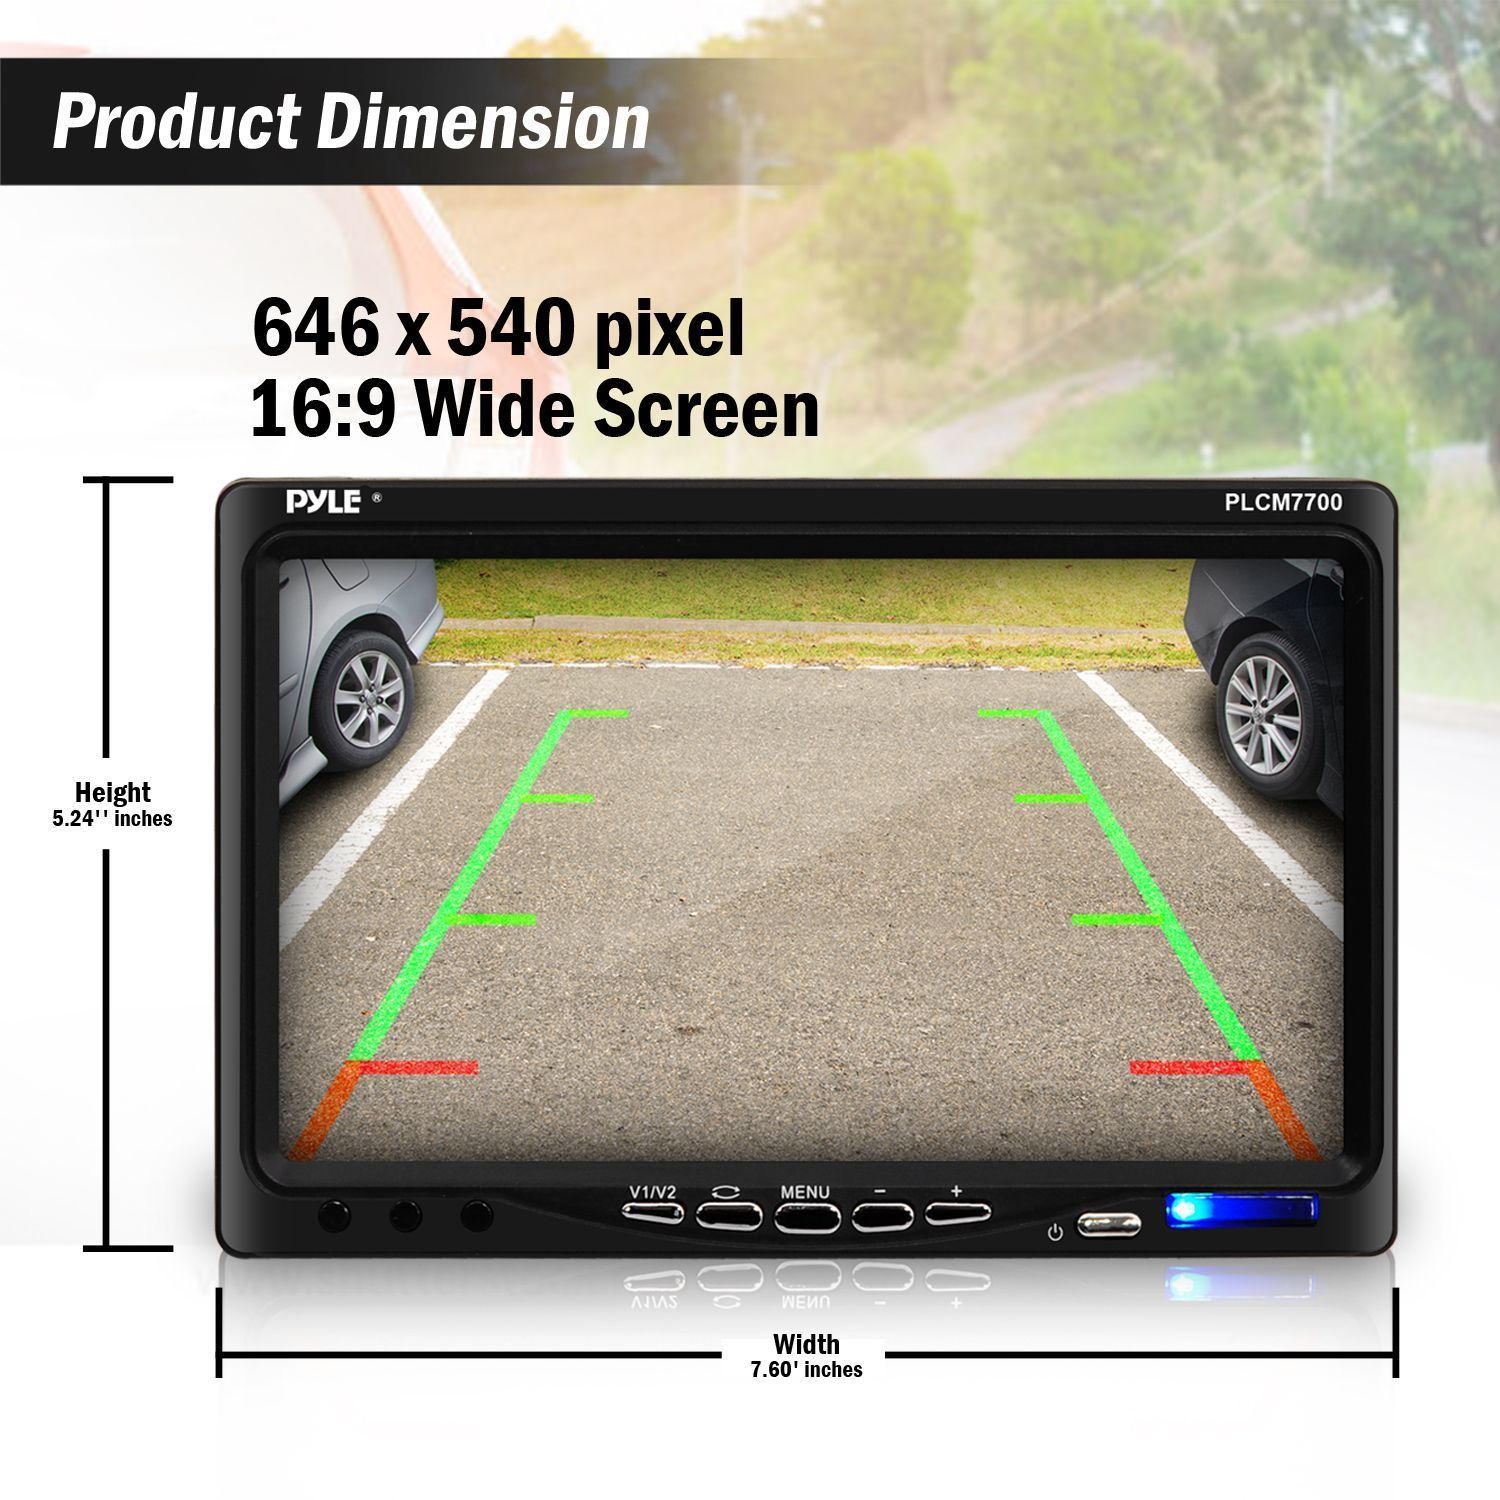 Pyle Backup Rear View Camera Monitor System, Distance Scale Lines, Waterproof, Night Vision, 7" Display, (PLCM7700)